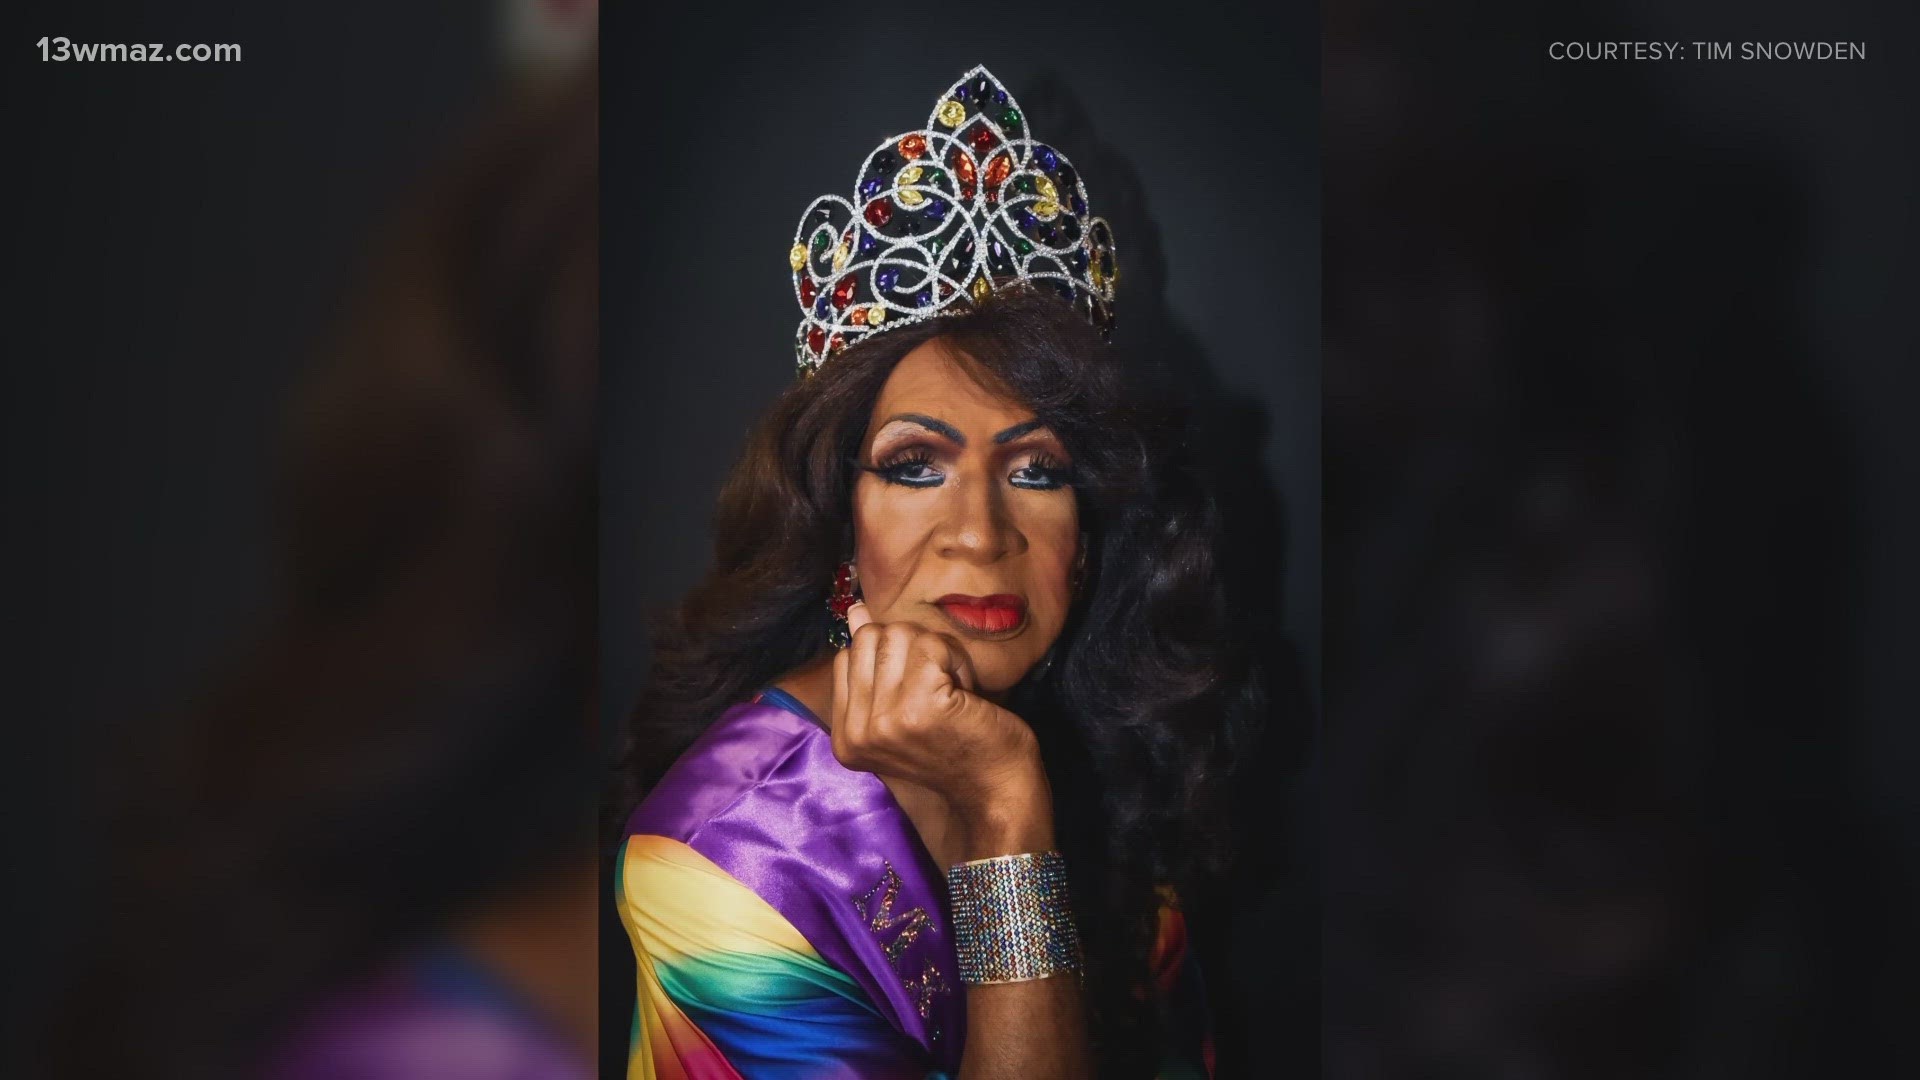 Tangerine Summers was one of Central Georgia's longest-performing drag queens and was a fighter for the LGBTQ+ community in Macon.